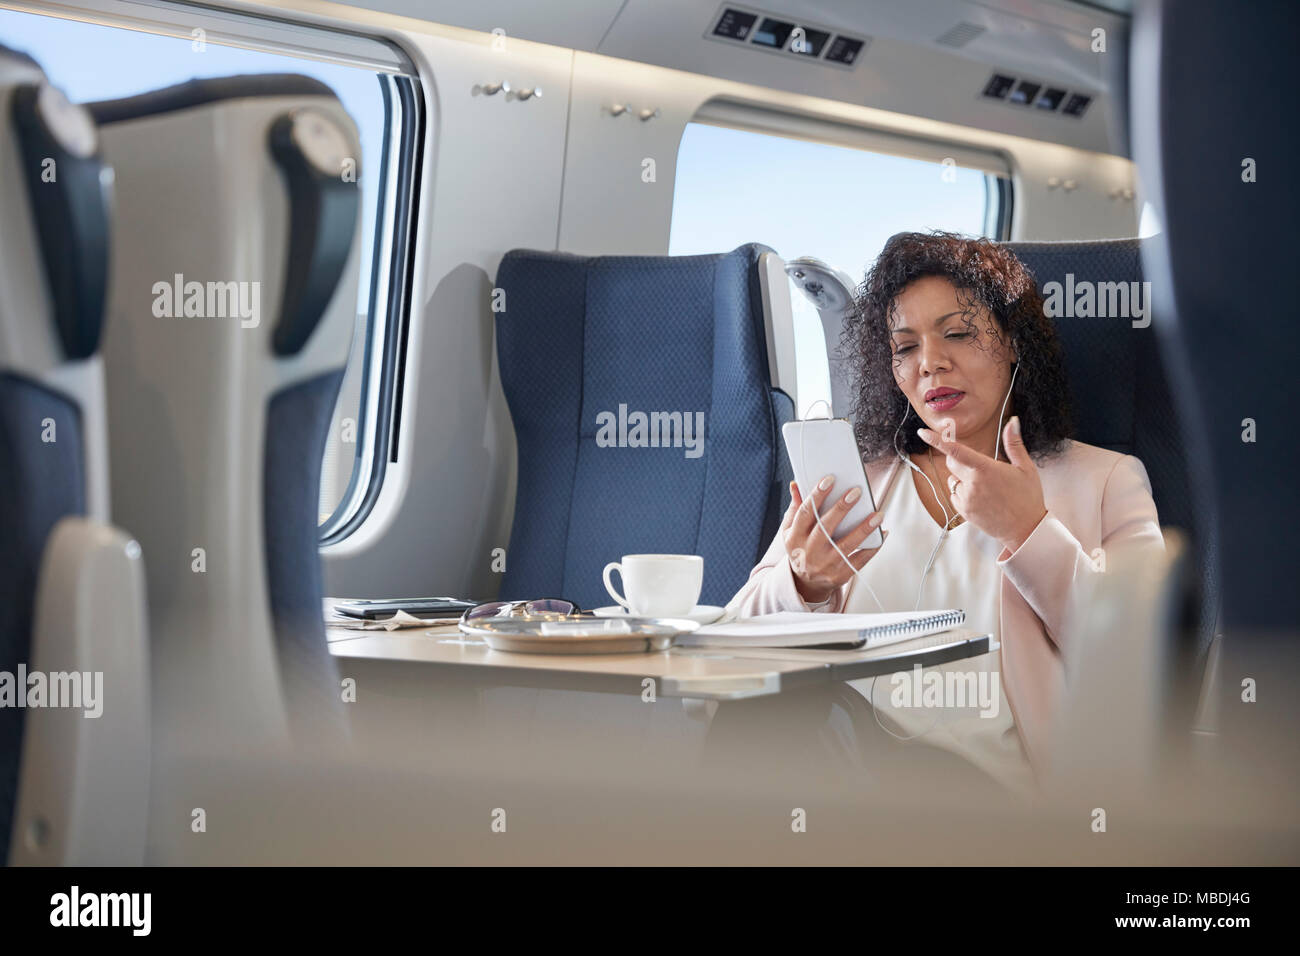 Businesswoman video chatting with headphones and smart phone on passenger train Stock Photo